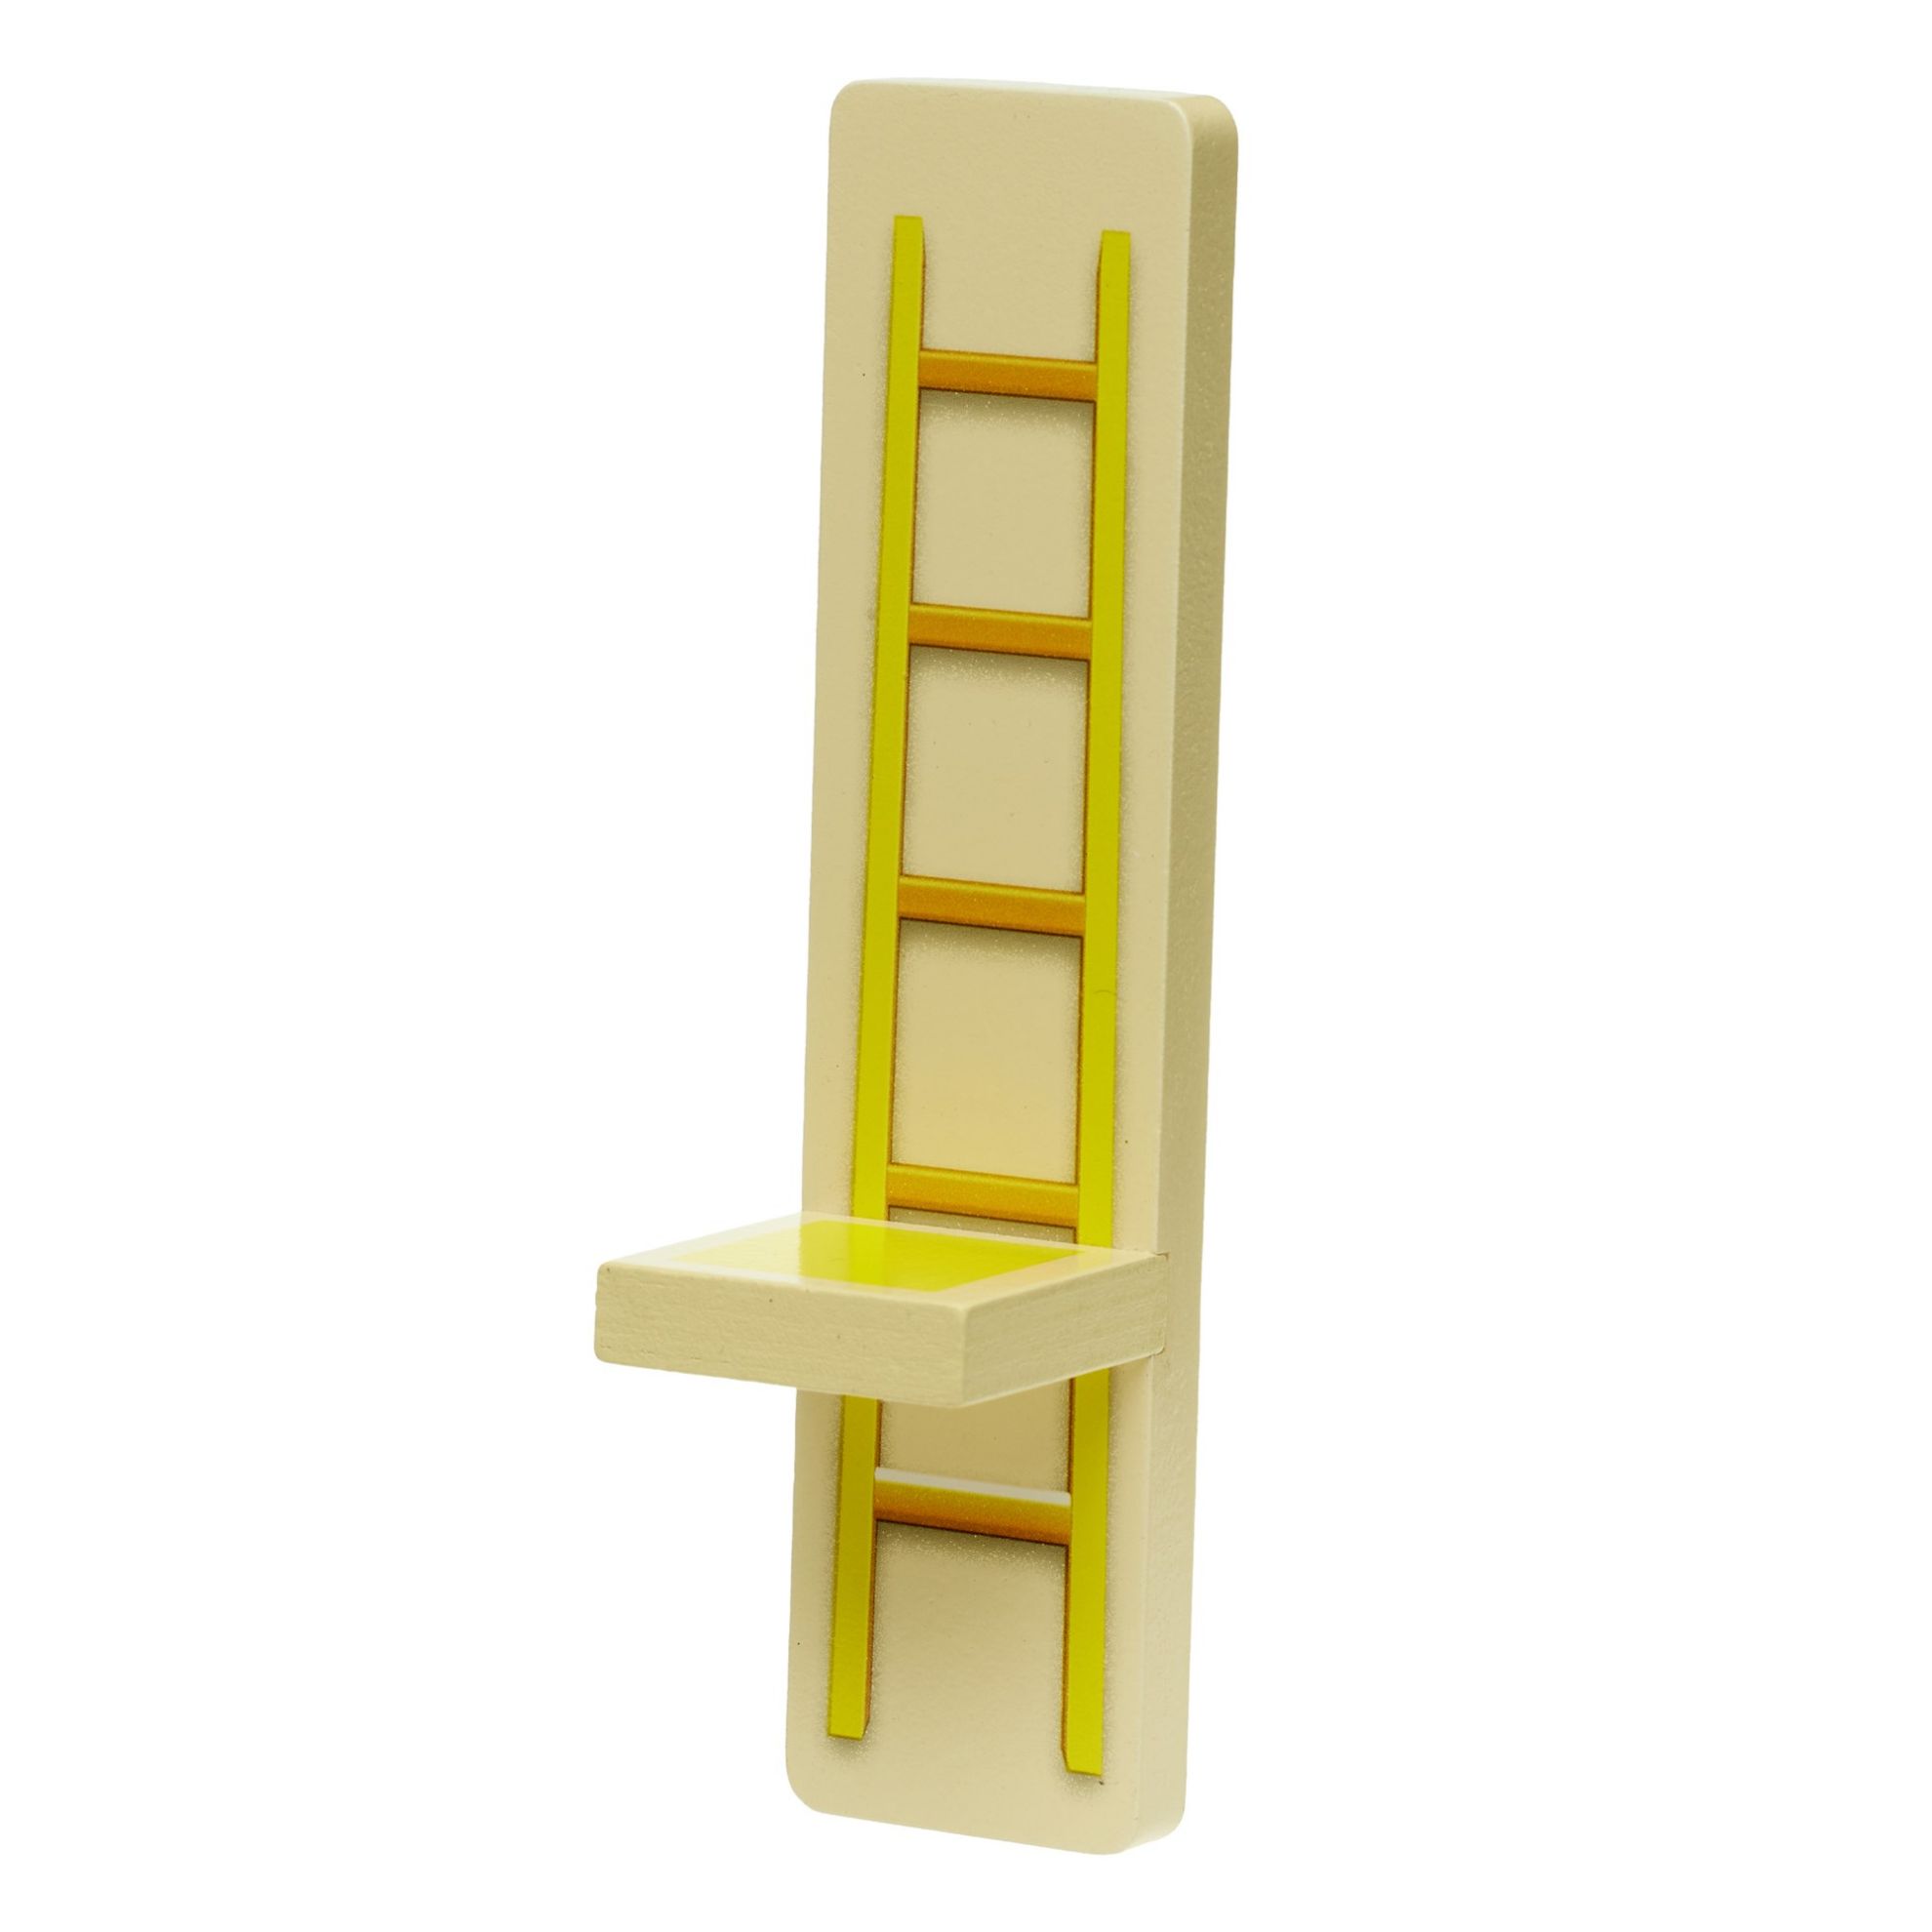 Spare Parts - Fireman Sam Wooden Fire Station  - Wooden Ladders